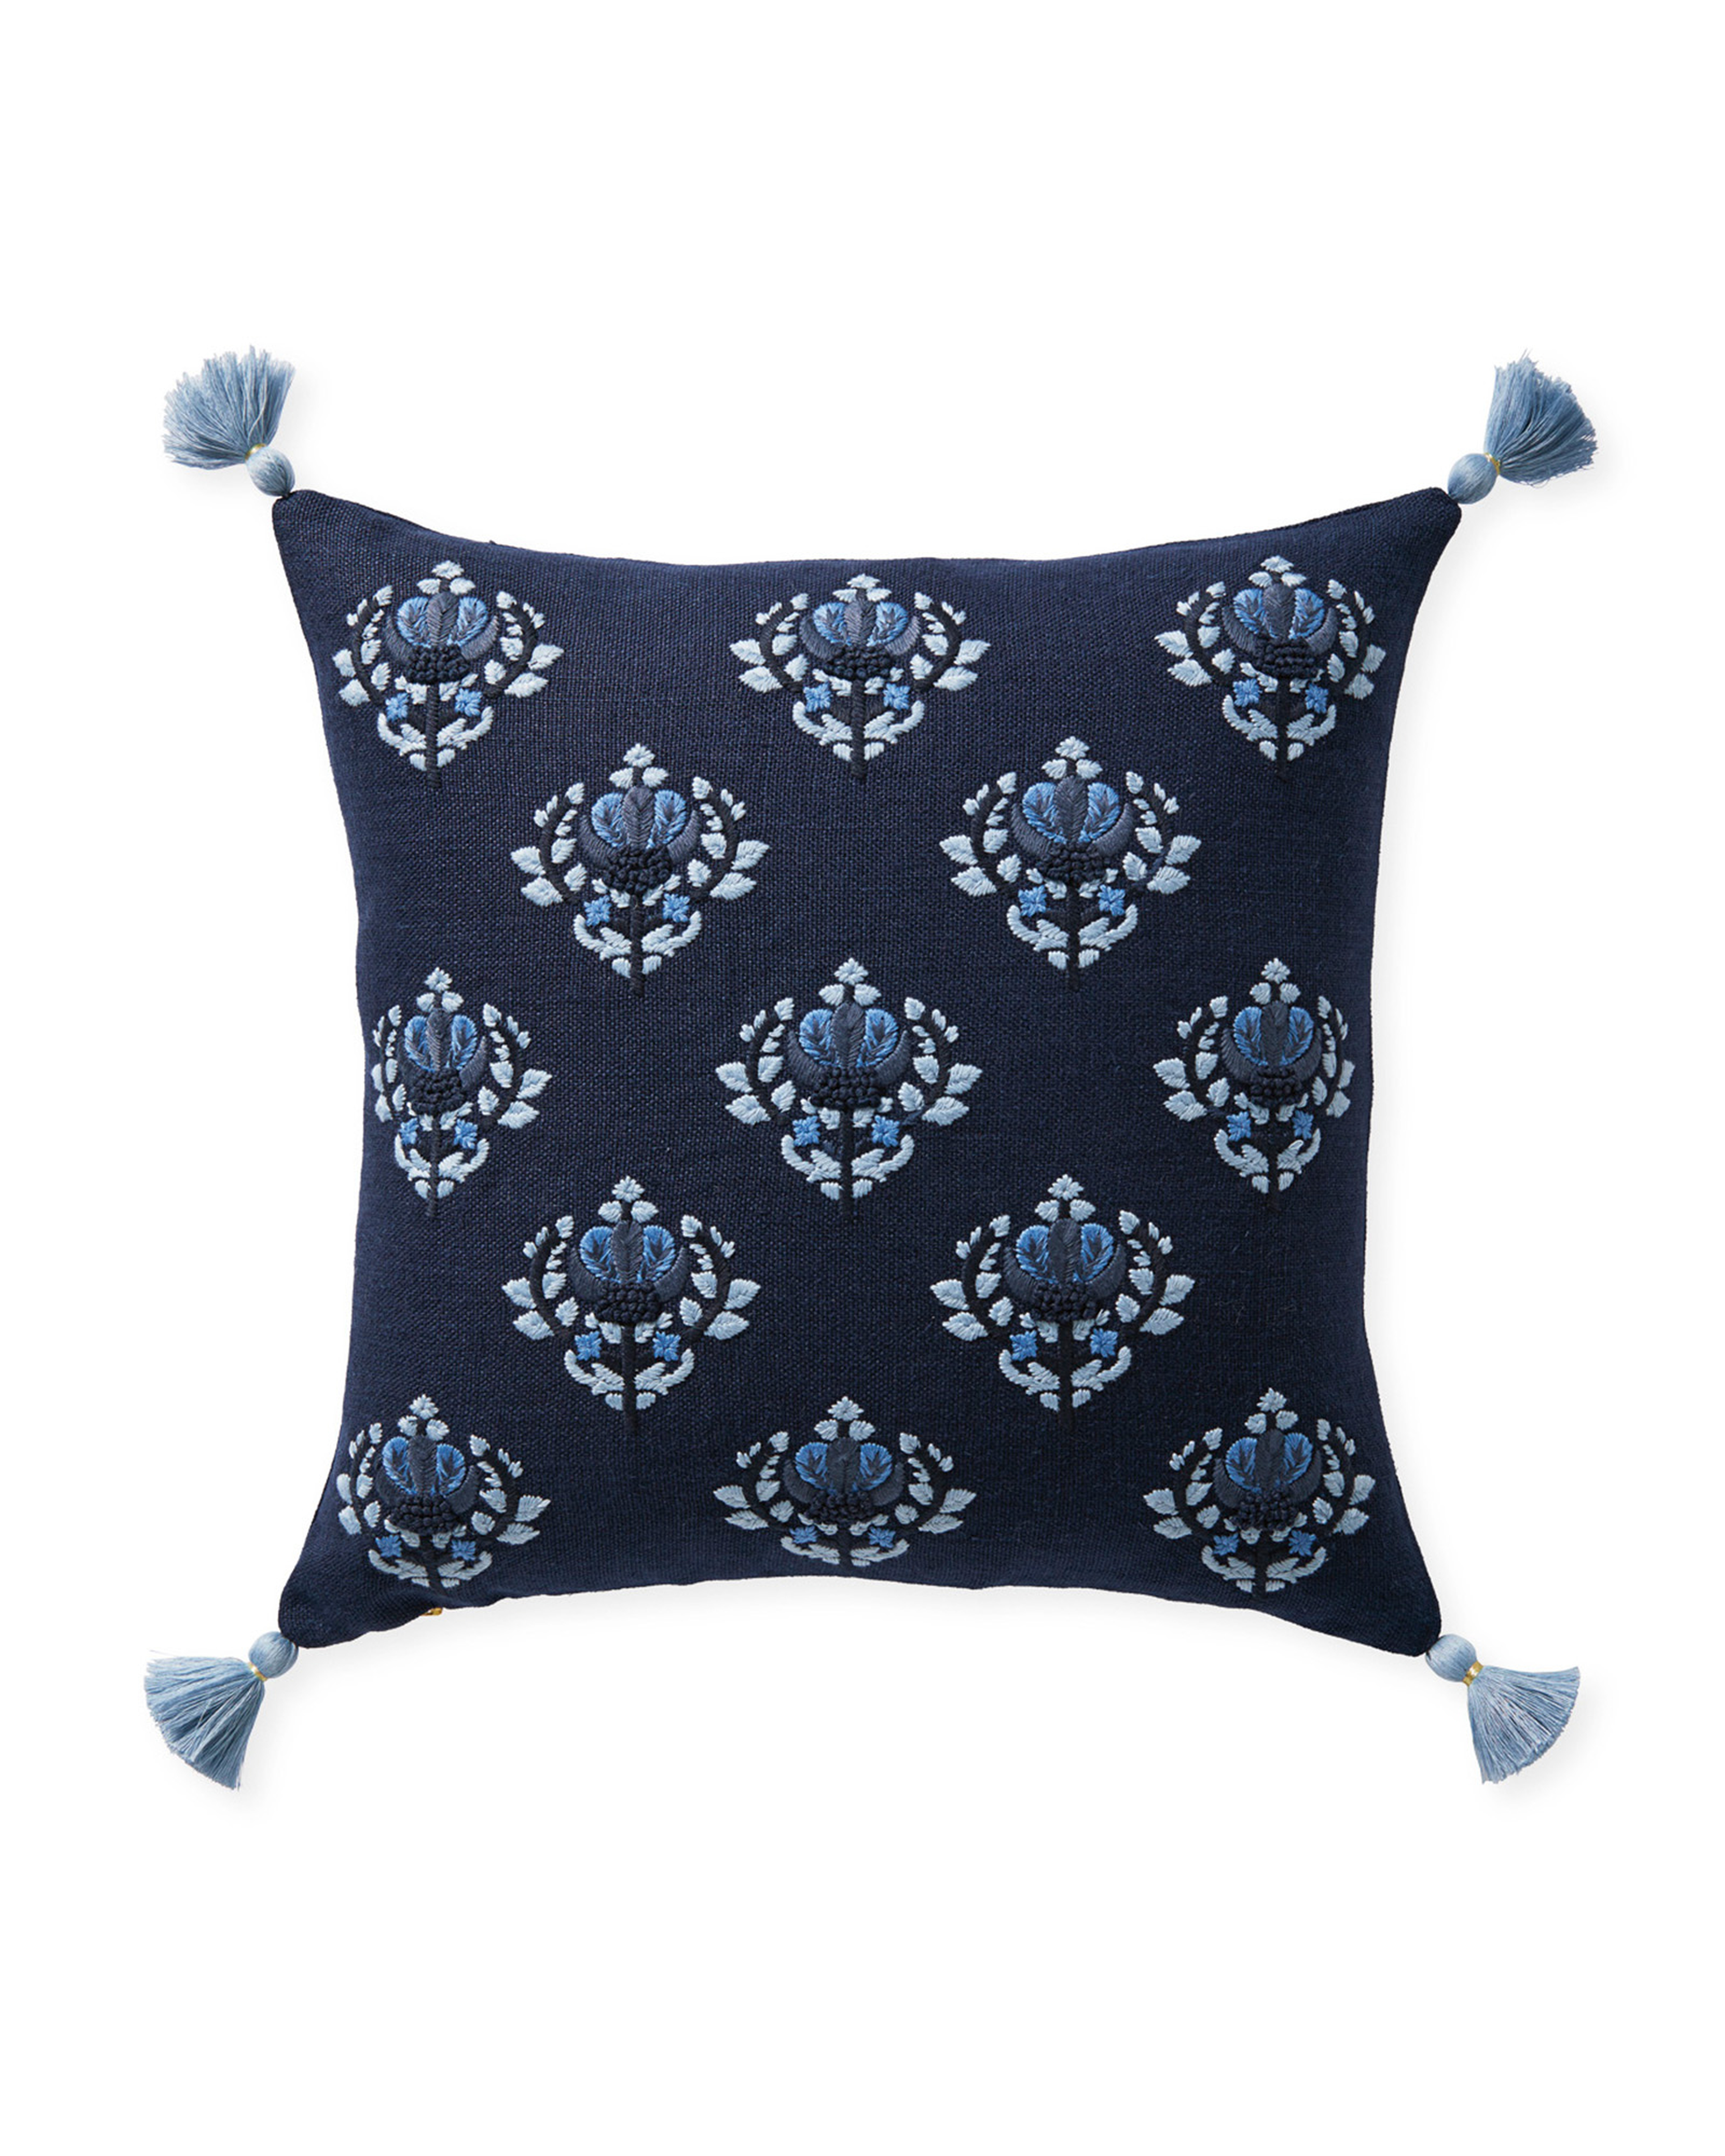 Kemp 20" SQ Pillow Cover - Navy - Insert sold separately - Serena and Lily